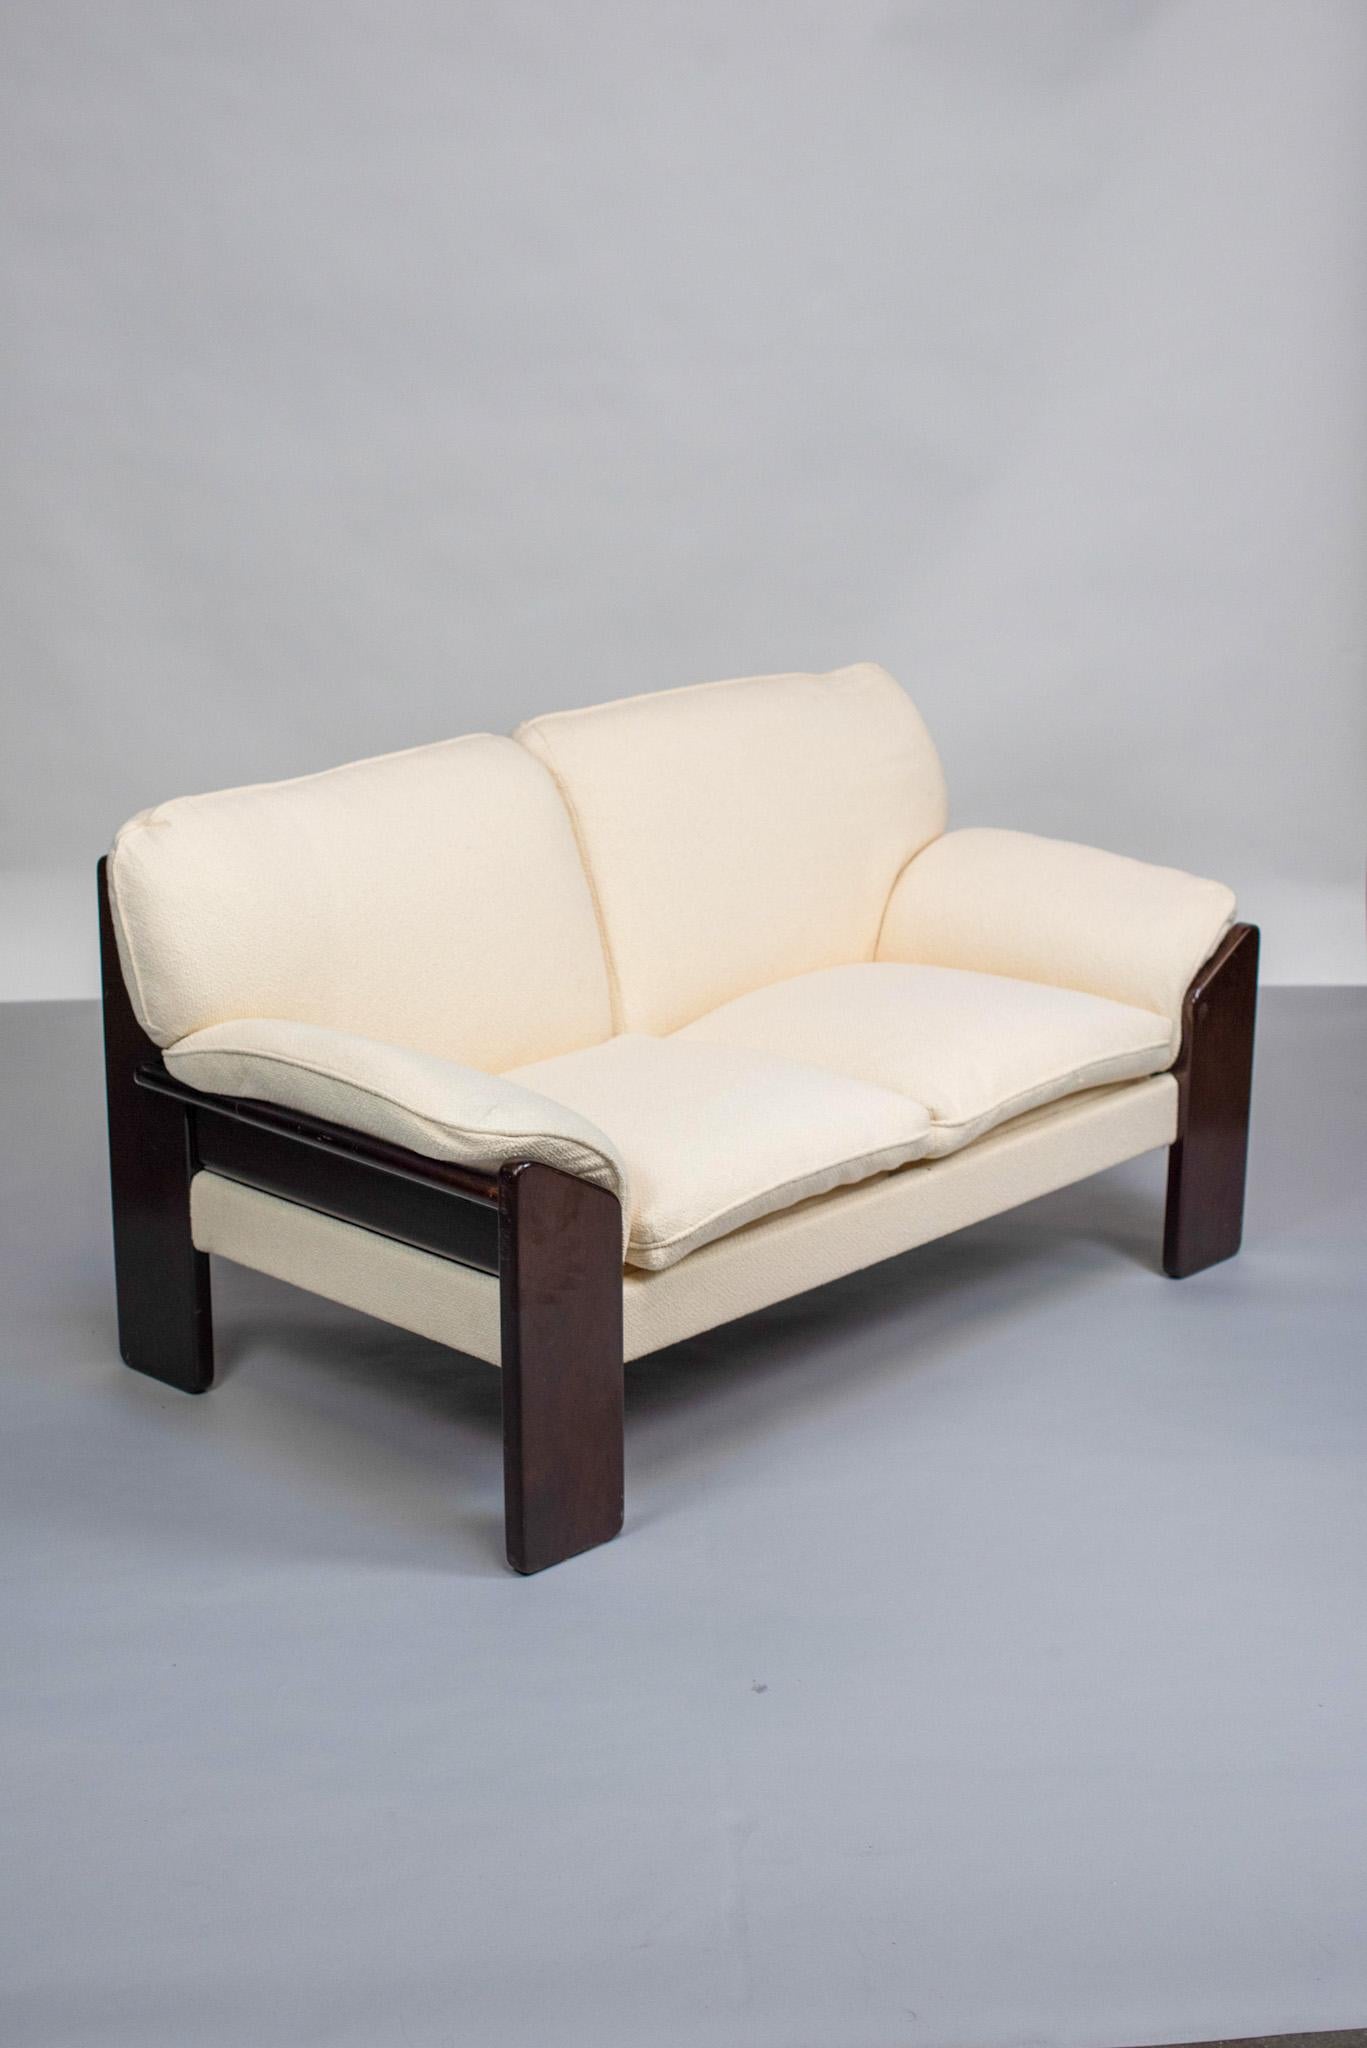 Hand-Crafted Jean Gillon, 2-seater sofa, c. 1970. Probel Label For Sale